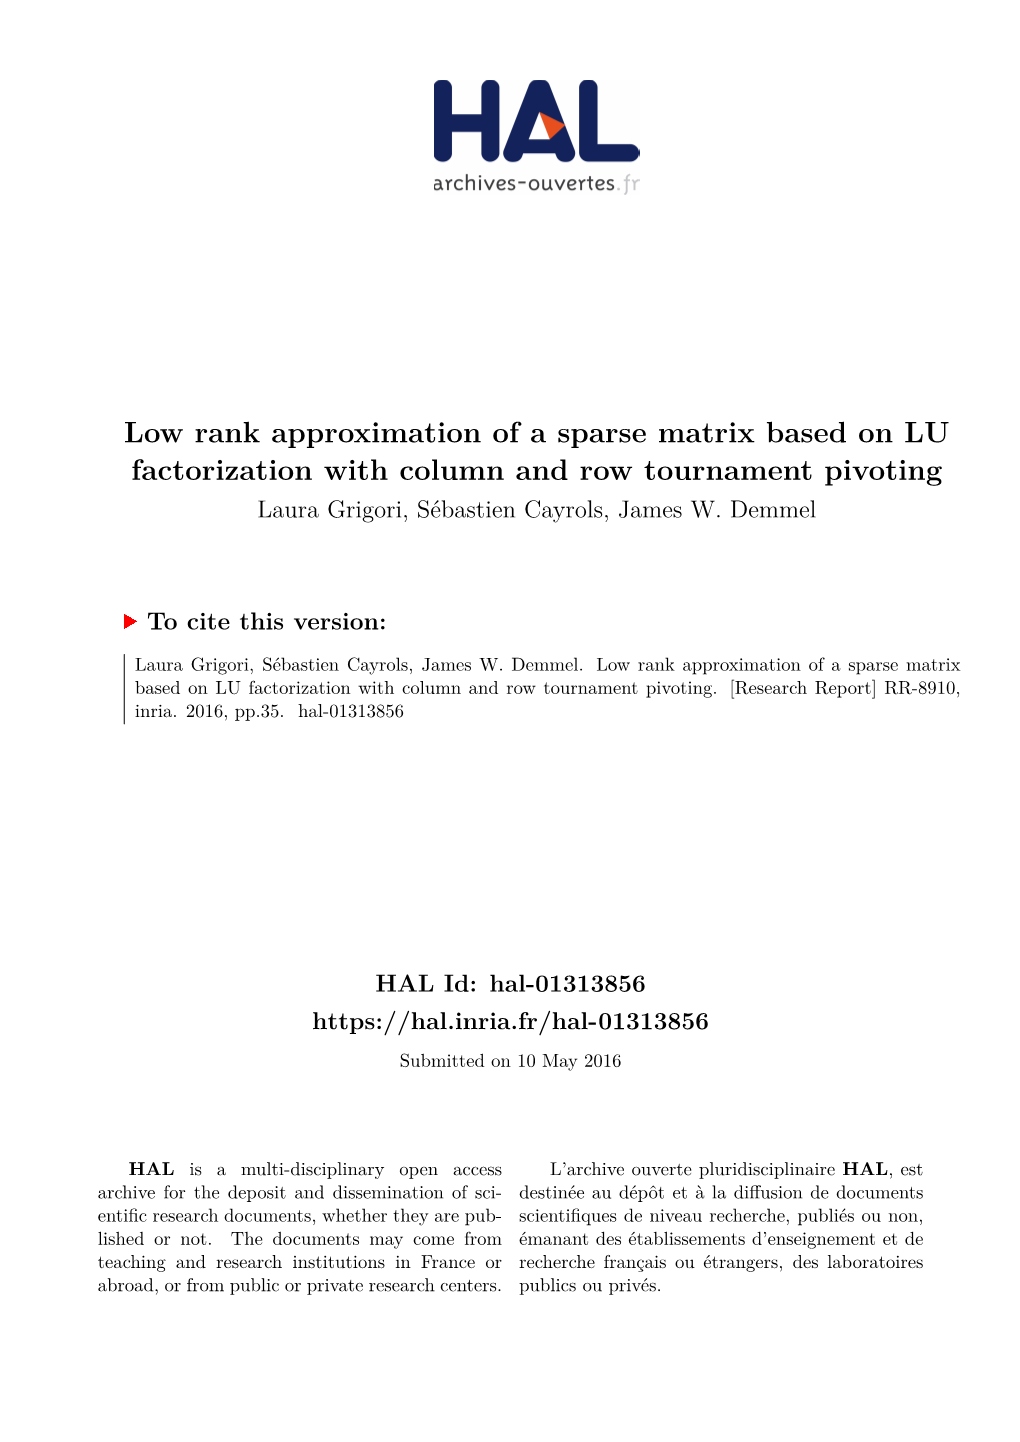 Low Rank Approximation of a Sparse Matrix Based on LU Factorization with Column and Row Tournament Pivoting Laura Grigori, Sébastien Cayrols, James W